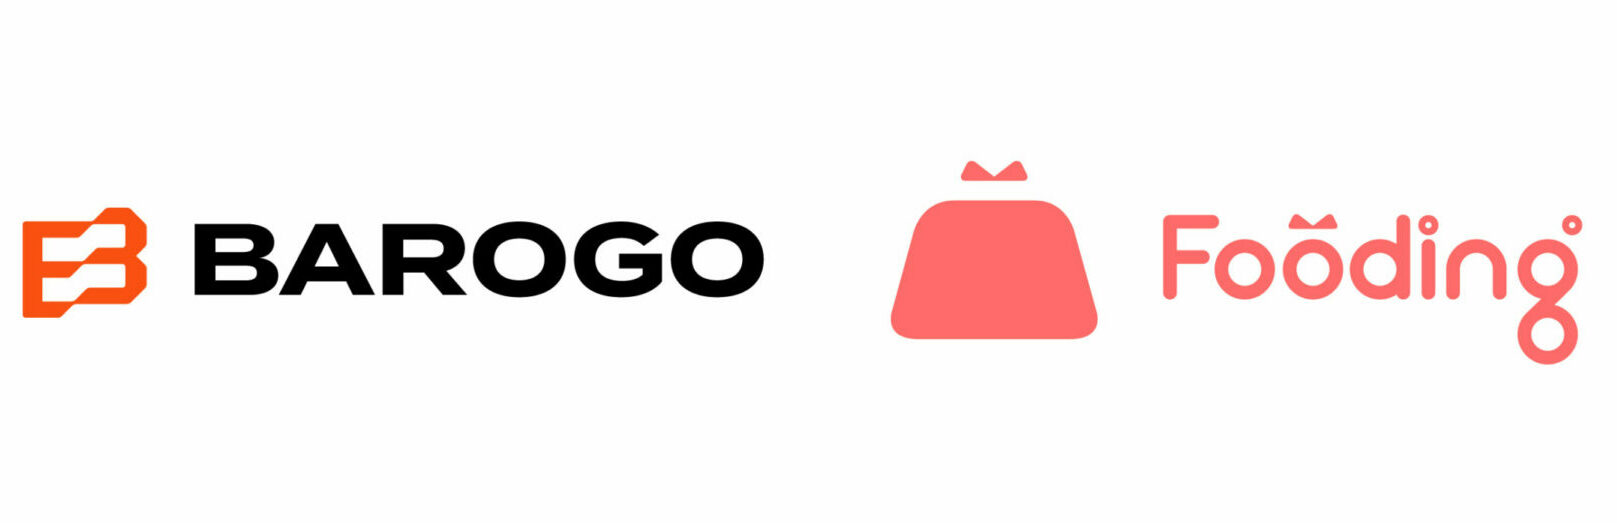 Barogo invests in Fooding